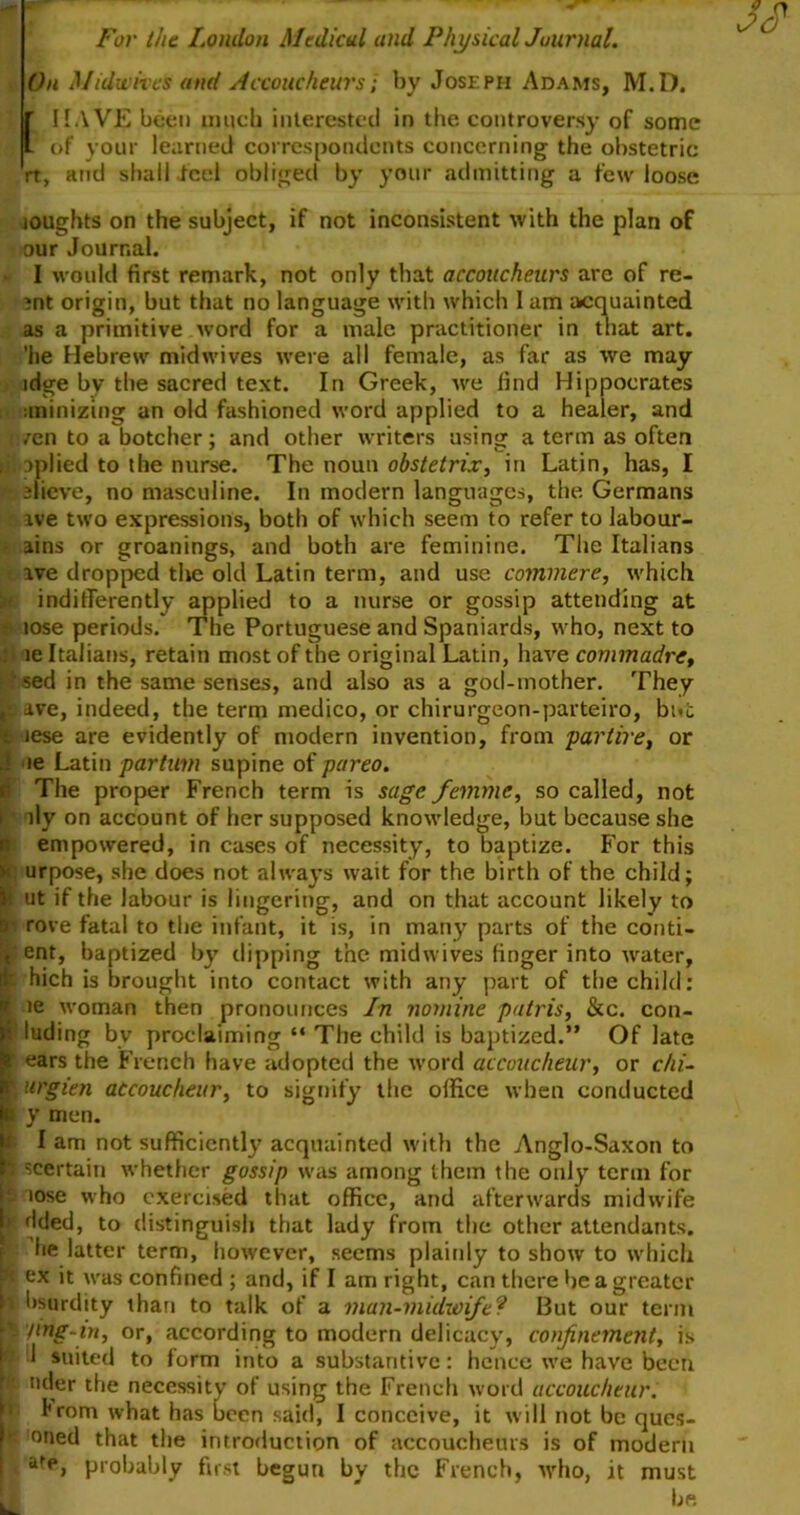 For the London Medical and Physical Journal. On Midwives and Accoucheurs; by Joseph Adams, M.D. r HAVE been much interested in the controversy of some if* of your learned correspondents concerning the obstetric it, and shall feel obliged by your admitting a few loose loughts on the subject, if not inconsistent with the plan of our Journal. I would first remark, not only that accoucheurs are of re- ?nt origin, but that no language with which I am acquainted as a primitive word for a male practitioner in that art. 'he Hebrew midwives were all female, as far as we may ldge by the sacred text. In Greek, we find Hippocrates uninizing an old fashioned word applied to a healer, and i /en to a botcher; and other writers using a term as often ii: oplied to the nurse. The noun obstetrix, in Latin, has, I ffieve, no masculine. In modern languages, the Germans is ave two expressions, both of which seem to refer to labour- ains or groanings, and both are feminine. The Italians ive dropped the old Latin term, and use commere, which indifferently applied to a nurse or gossip attending at lose periods. The Portuguese and Spaniards, who, next to : le Italians, retain most of the original Latin, have commadre, sed in the same senses, and also as a god-mother. They jjc ave, indeed, the term medico, or chirurgeon-parteiro, but lese are evidently of modern invention, from par tire, or j ie Latin partum supine of pareo. d The proper French term is sage femme, so called, not i lly on account of her supposed knowledge, but because she R empowered, in cases of necessity, to baptize. For this k urpose, she does not always wait for the birth of the child; il ut if the labour is lingering, and on that account likely to a rove fatal to the infant, it is, in many parts of the conti- f ent, baptized by dipping the midwives finger into water, ■ hich is brought into contact with any part of the child: It ie woman then pronounces In nomine patris, &c. con- 1 luding by proclaiming “ The child is baptized.” Of late l ears the French have adopted the word accoucheur, or chi- r nrgien accoucheur, to signify the office when conducted p y men. I am not sufficiently acquainted with the Anglo-Saxon to i ^certain whether gossip was among them the only term for p lose who exercised that office, and afterwards midwife t» dded, to distinguish that lady from the other attendants, he latter term, however, seems plainly to show to which ex it was confined ; and, if I am right, can there be a greater * bsurdity than to talk of a man-midwife? But our term | '/mg-in, or, according to modern delicacy, confinement, is rj 1 suited to form into a substantive: hence we have been £ uder the necessity of using the French word accoucheur. Irom what has been said, I conceive, it will not be ques- k oned that the introduction of accoucheurs is of modern . af<*, probably first begun by the French, who, it must I be